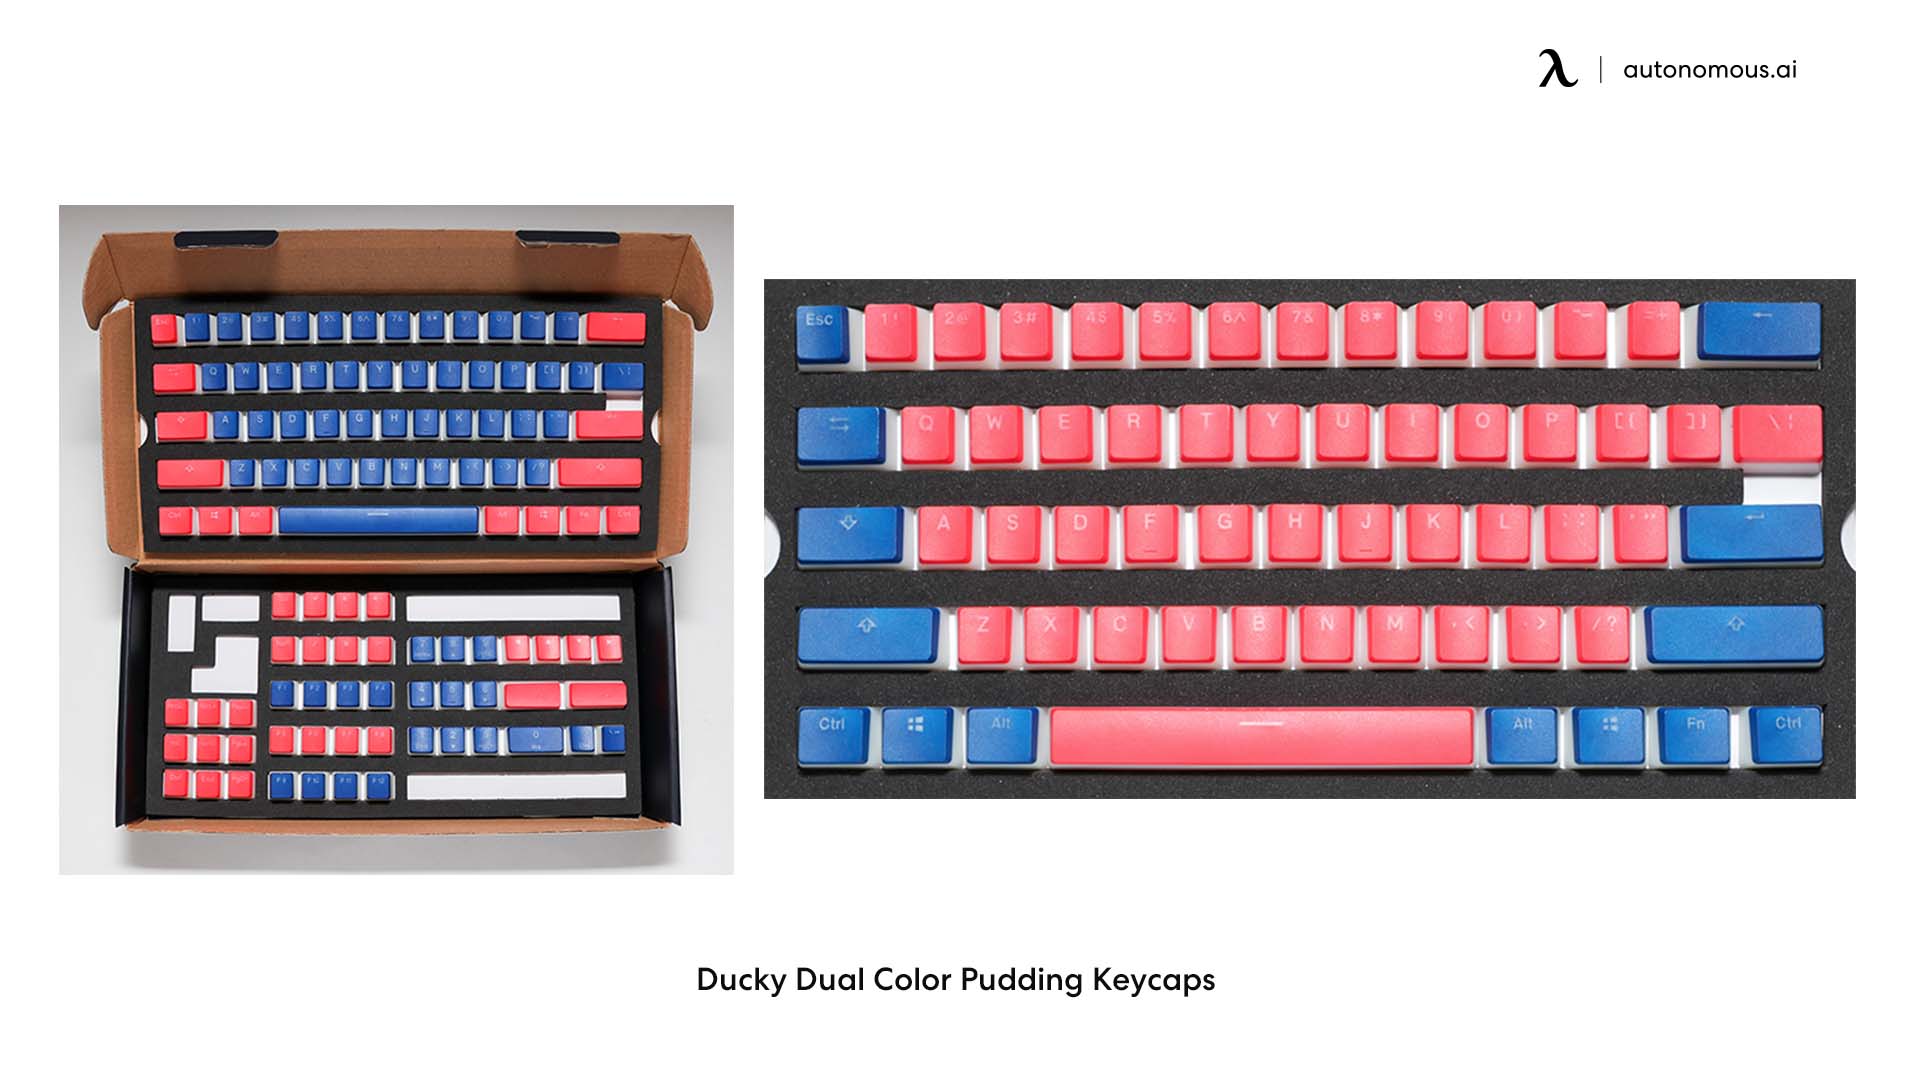 Ducky Dual Color Pudding Keycaps